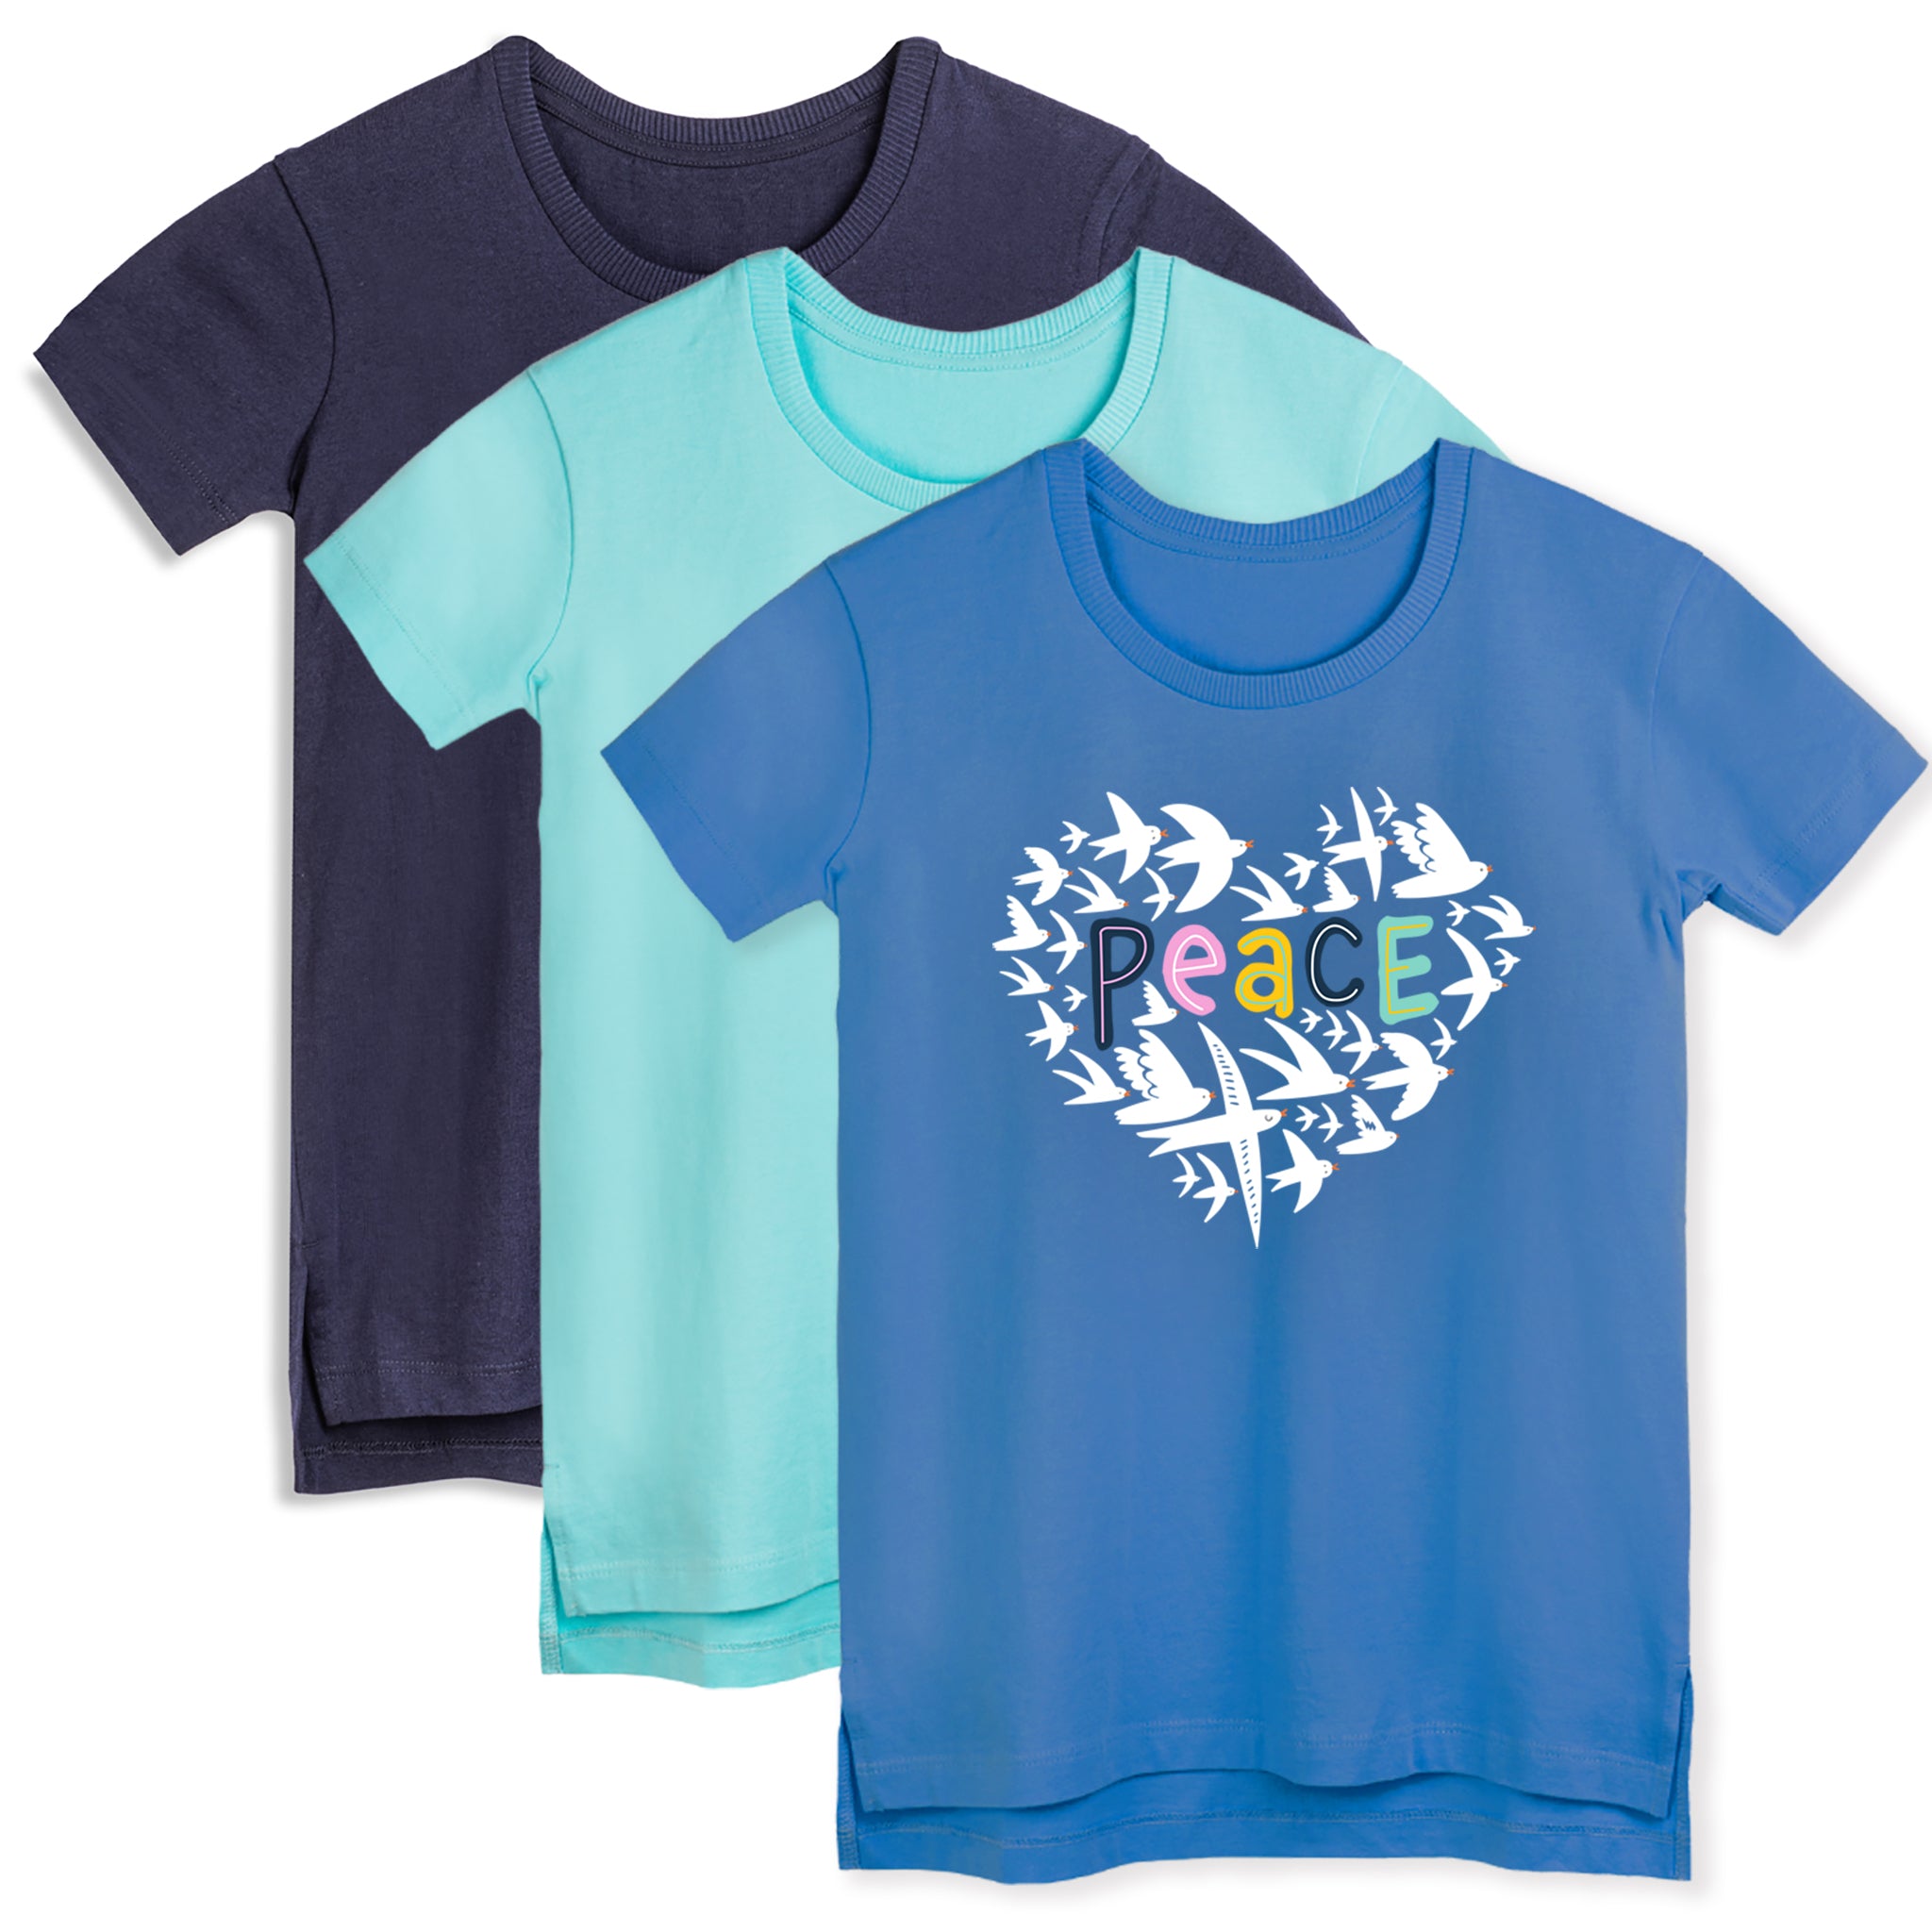 Pack 3 Extended Organic Cotton Kids T-Shirts Length - Mightly Shirts -